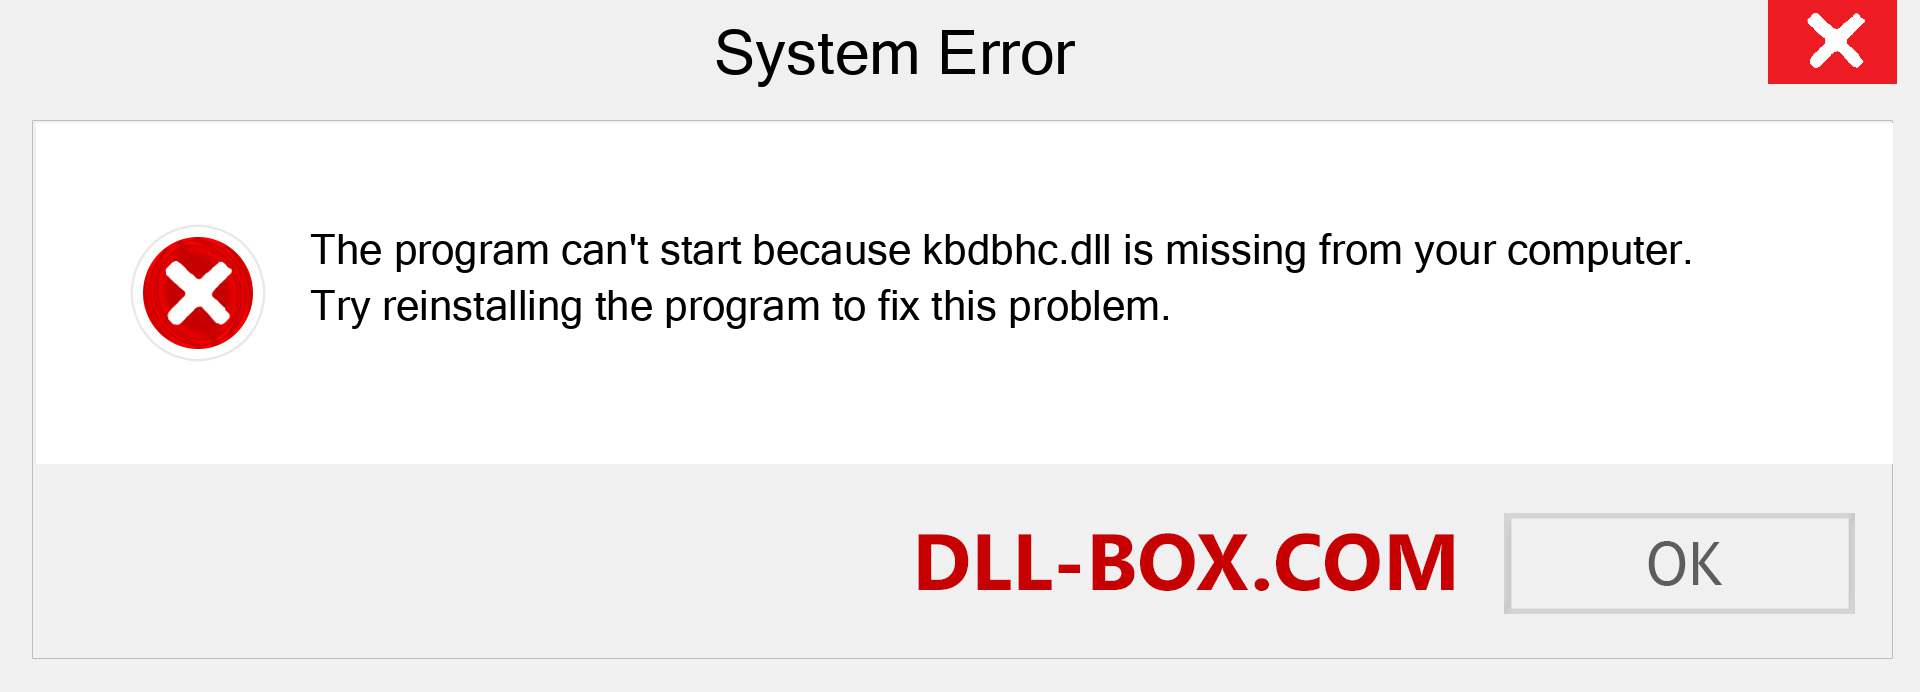  kbdbhc.dll file is missing?. Download for Windows 7, 8, 10 - Fix  kbdbhc dll Missing Error on Windows, photos, images